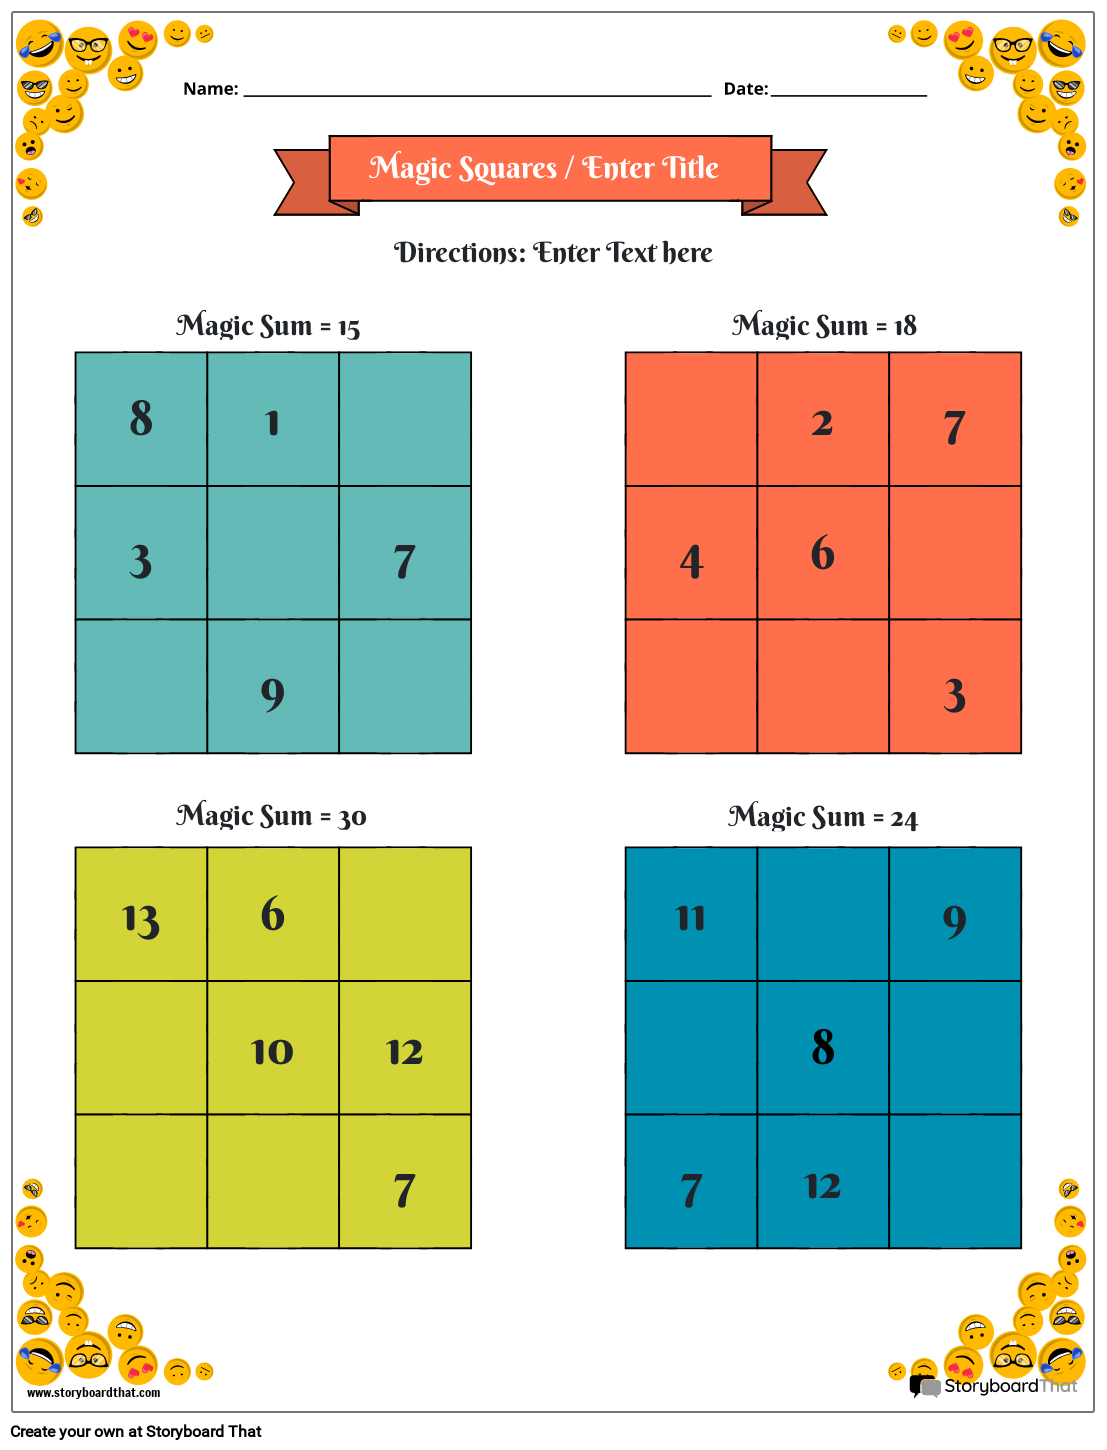 3x3 Magic Squares Worksheet with Smiley Face Border